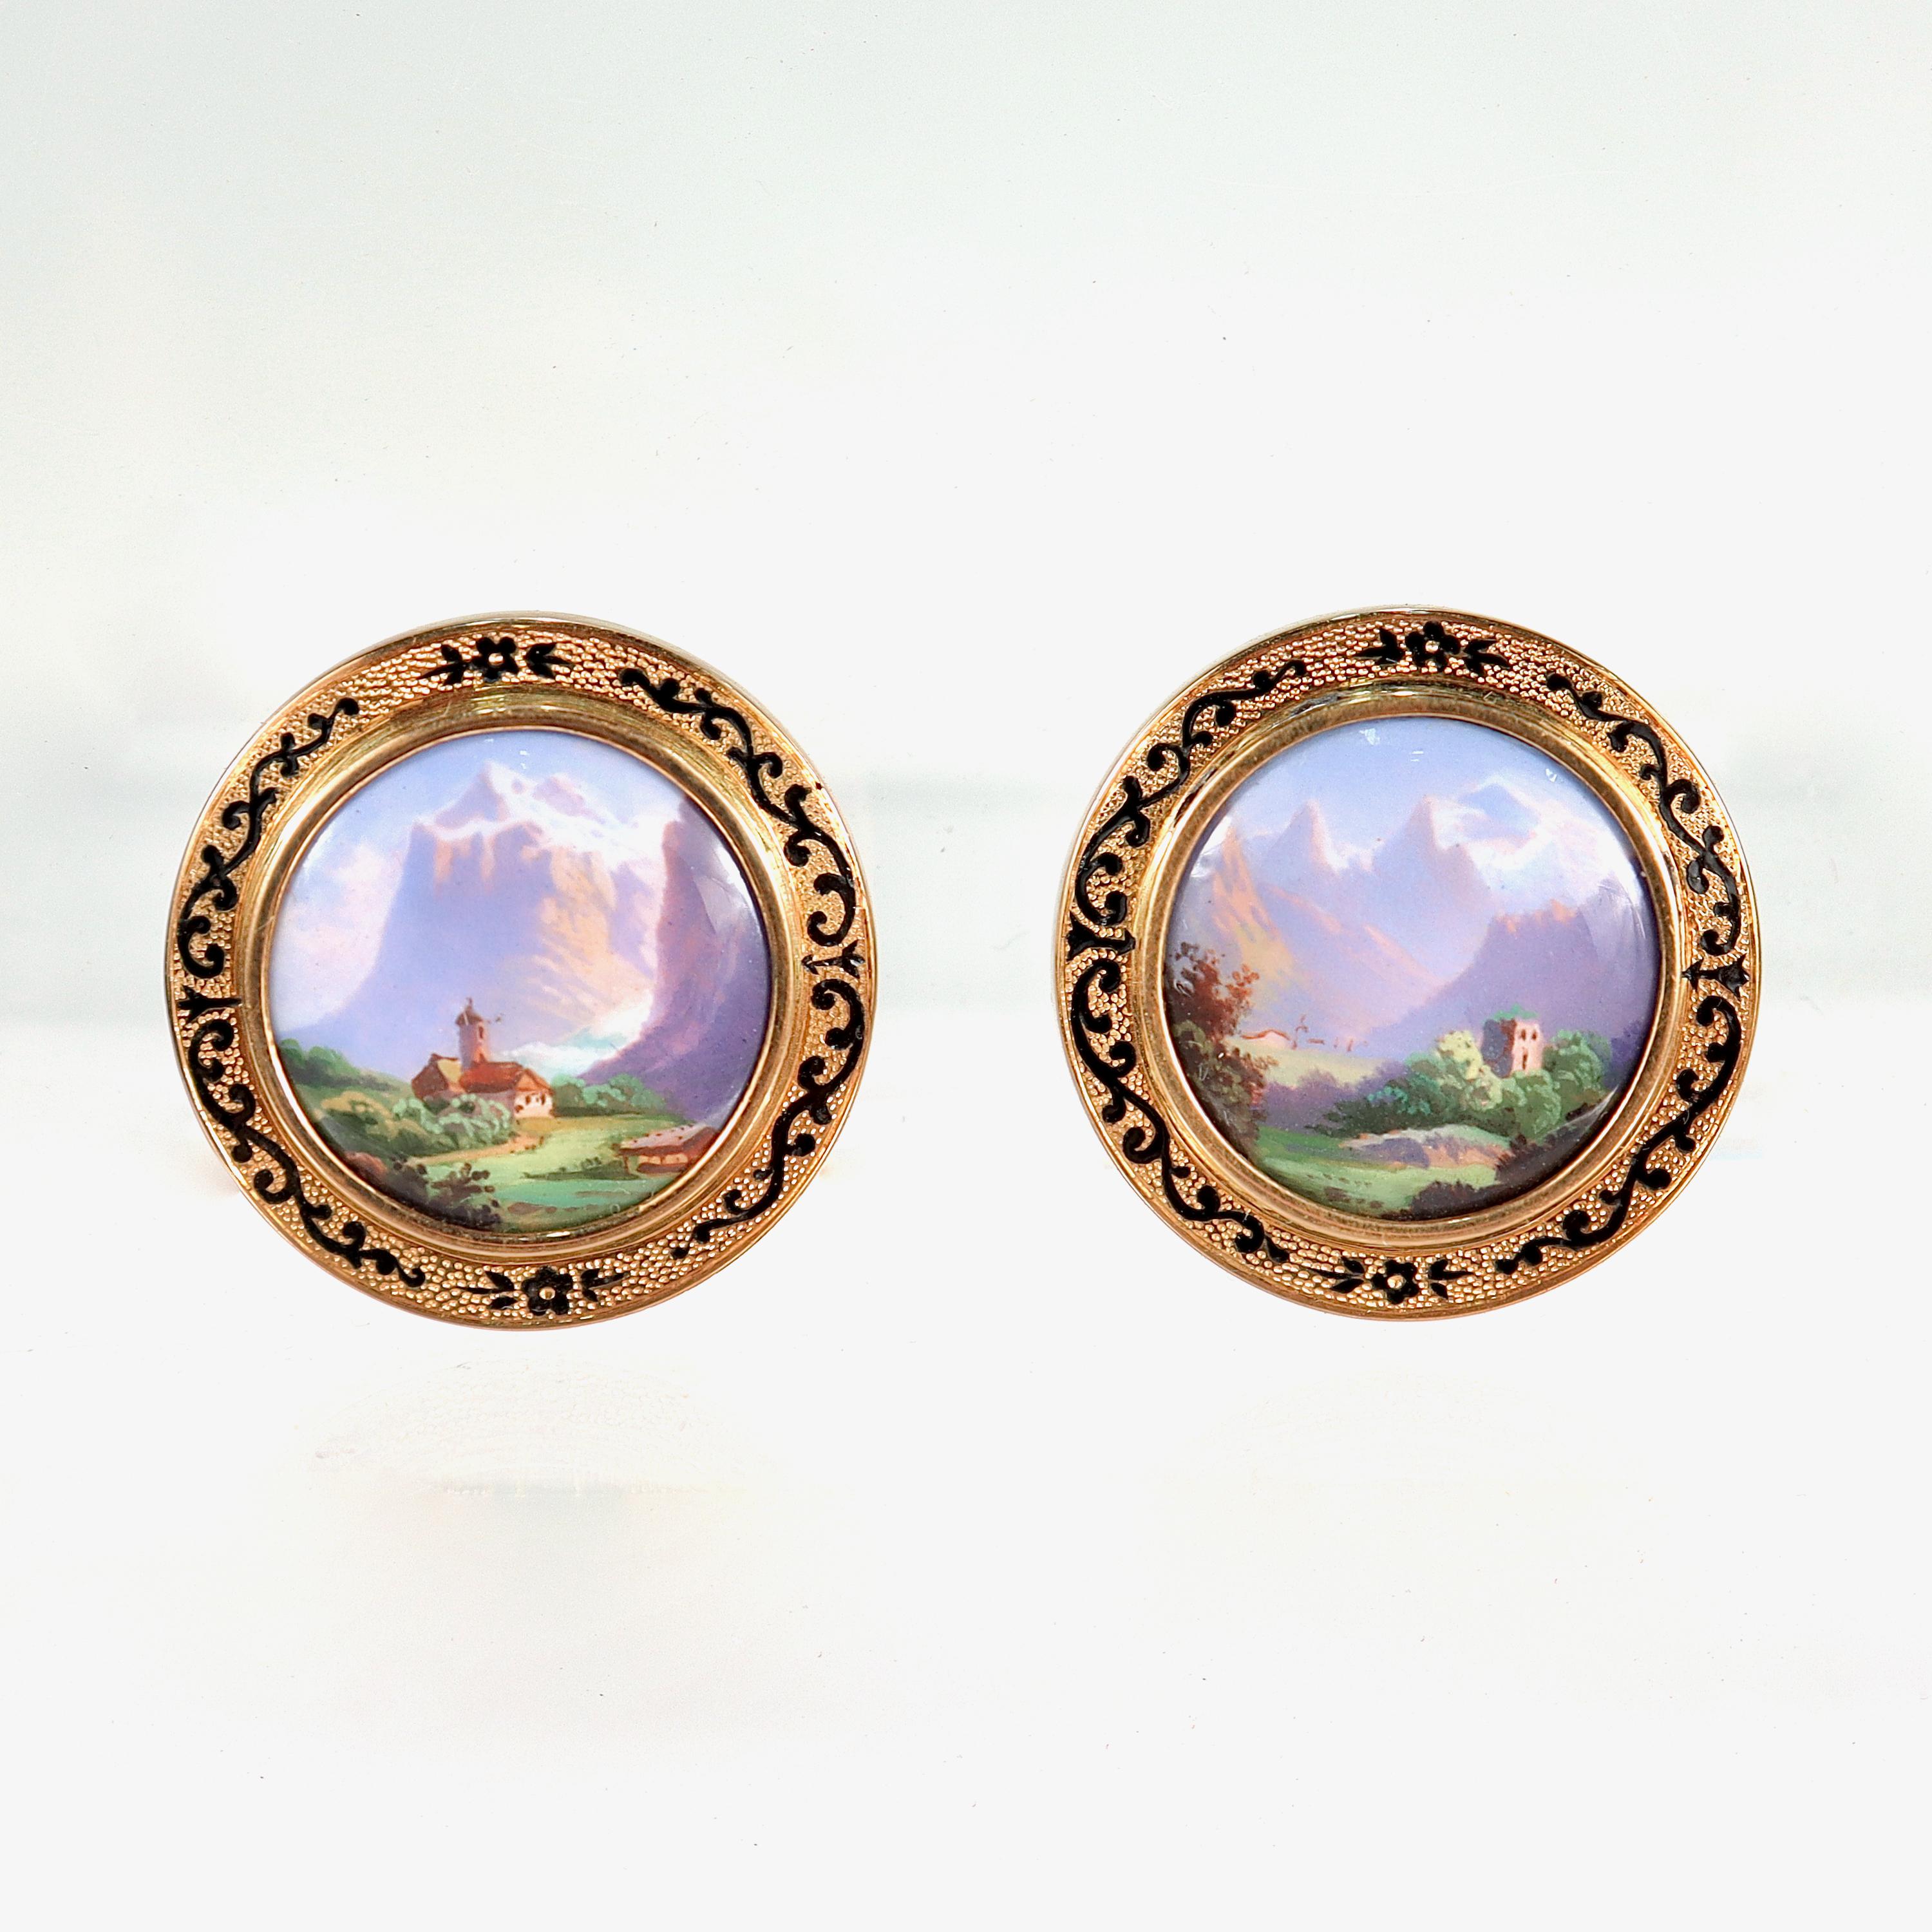 A very fine set of Swiss Victorian gold & enamel lapel buttons.

In 18 karat yellow gold. 

Each button with a round enamel painted scenes of Lake Geneva bezel set in 18k gold with filigree enamel design surrounding the enamel.

Simple a wonderful